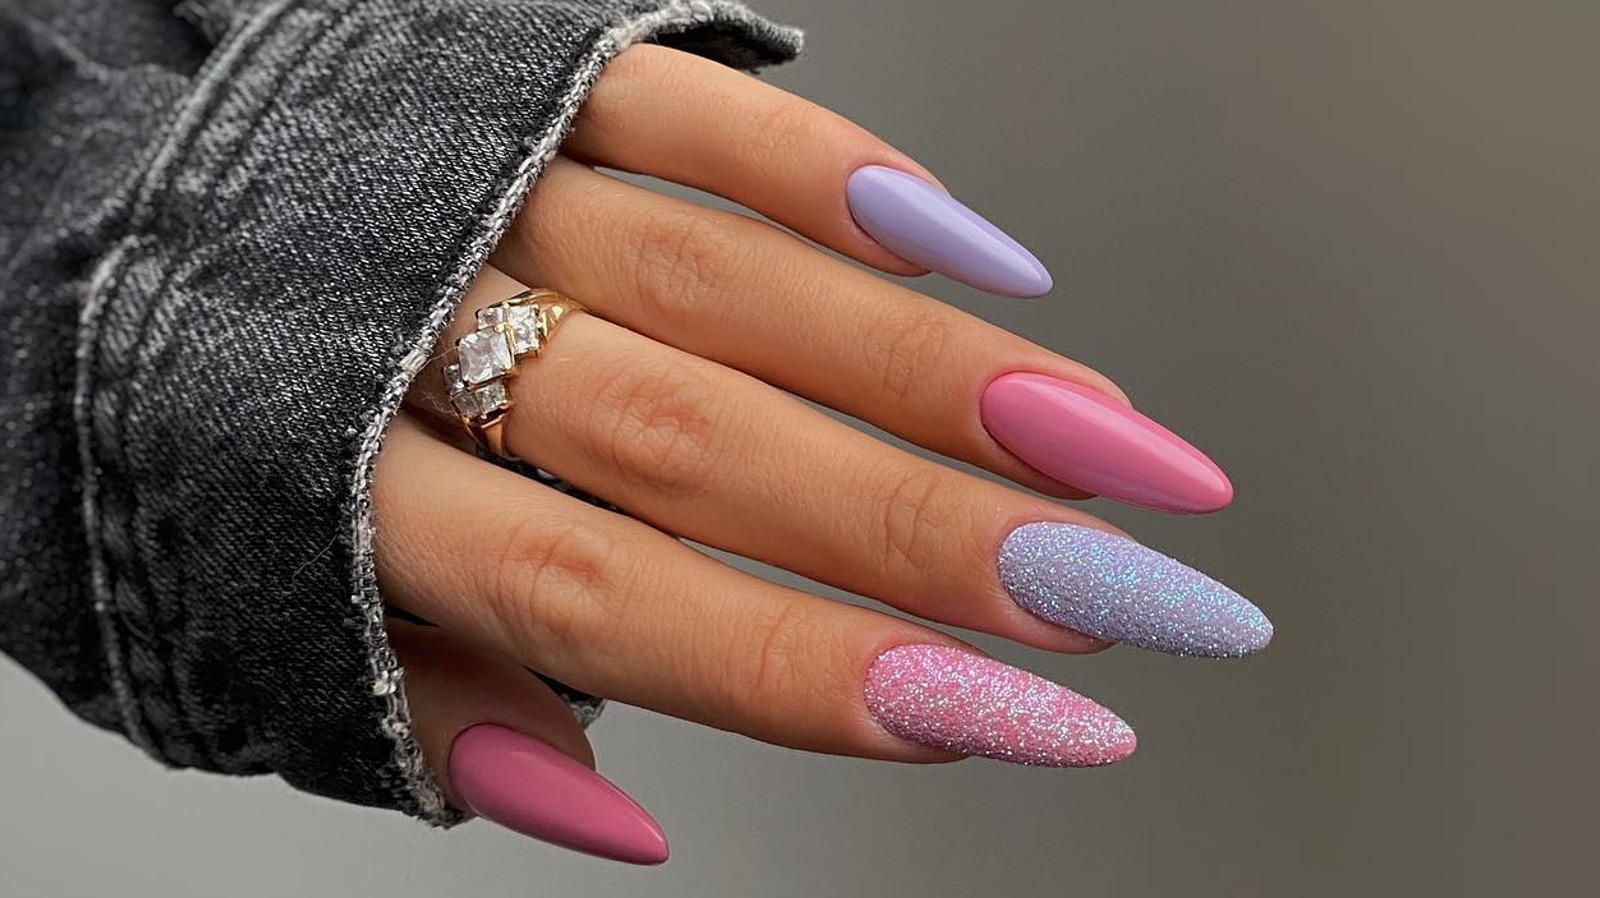 Half Moon Manicure Ideas for Every Nail Length